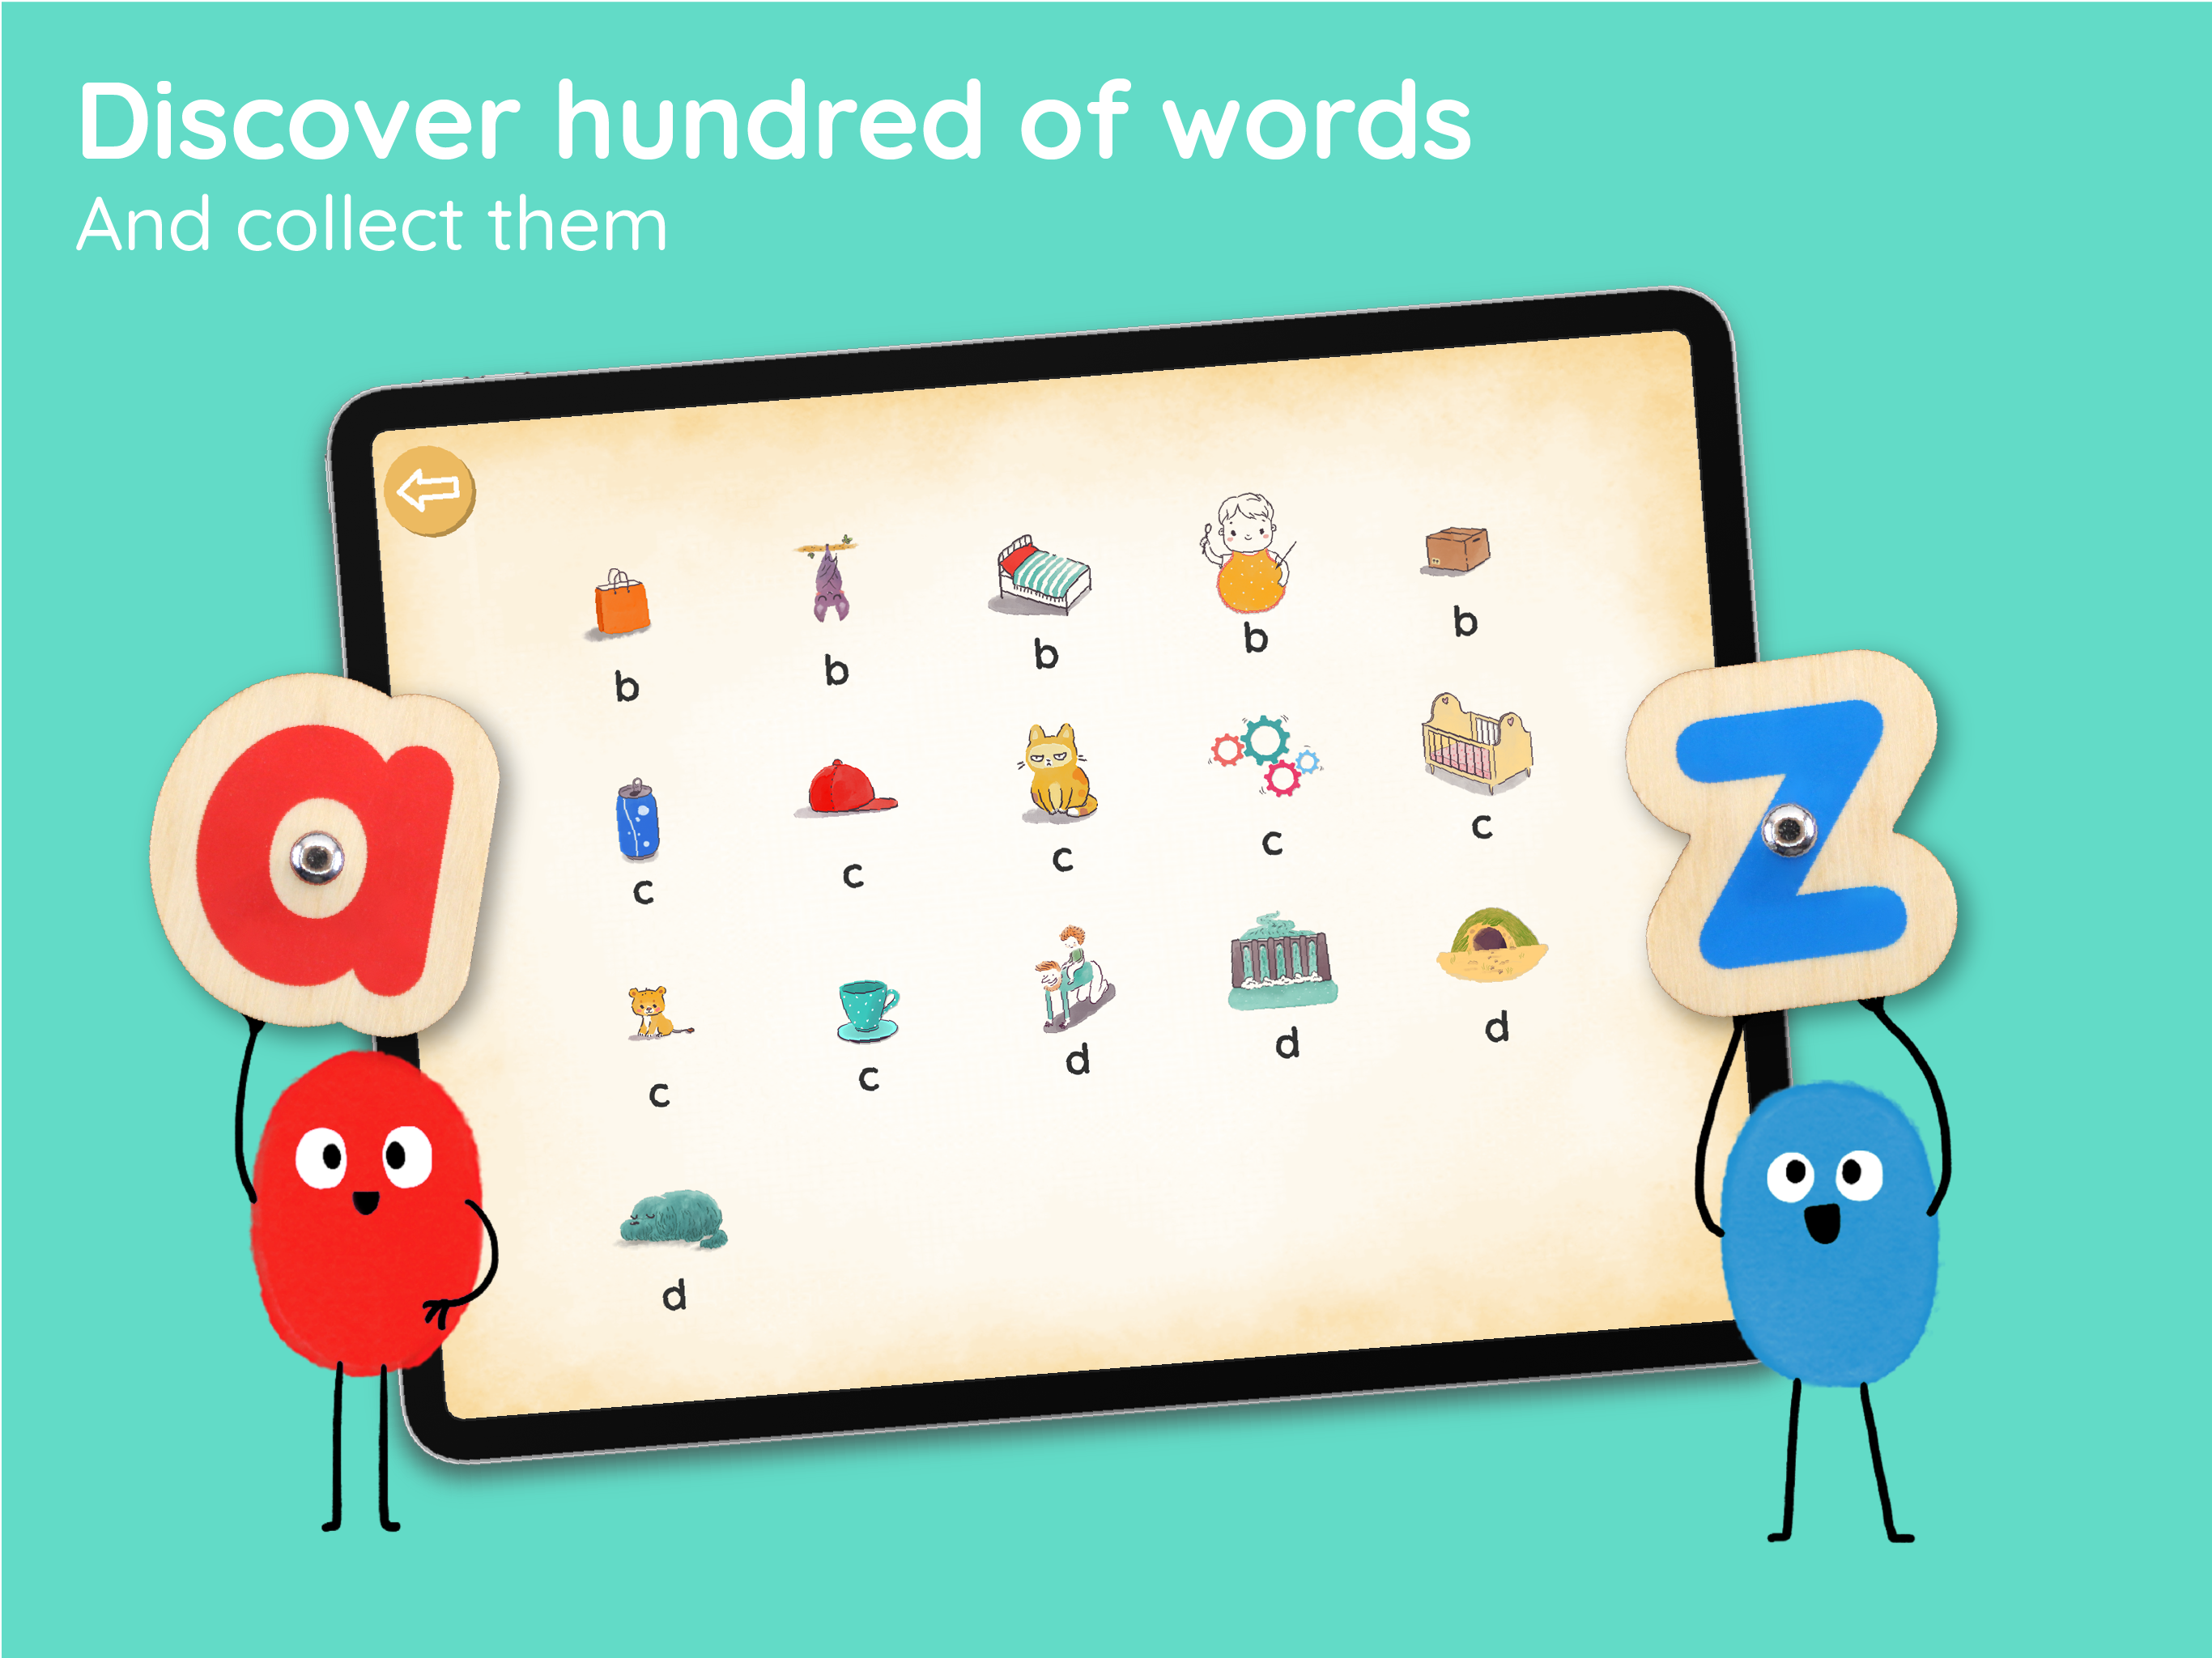 Discover hundred of words